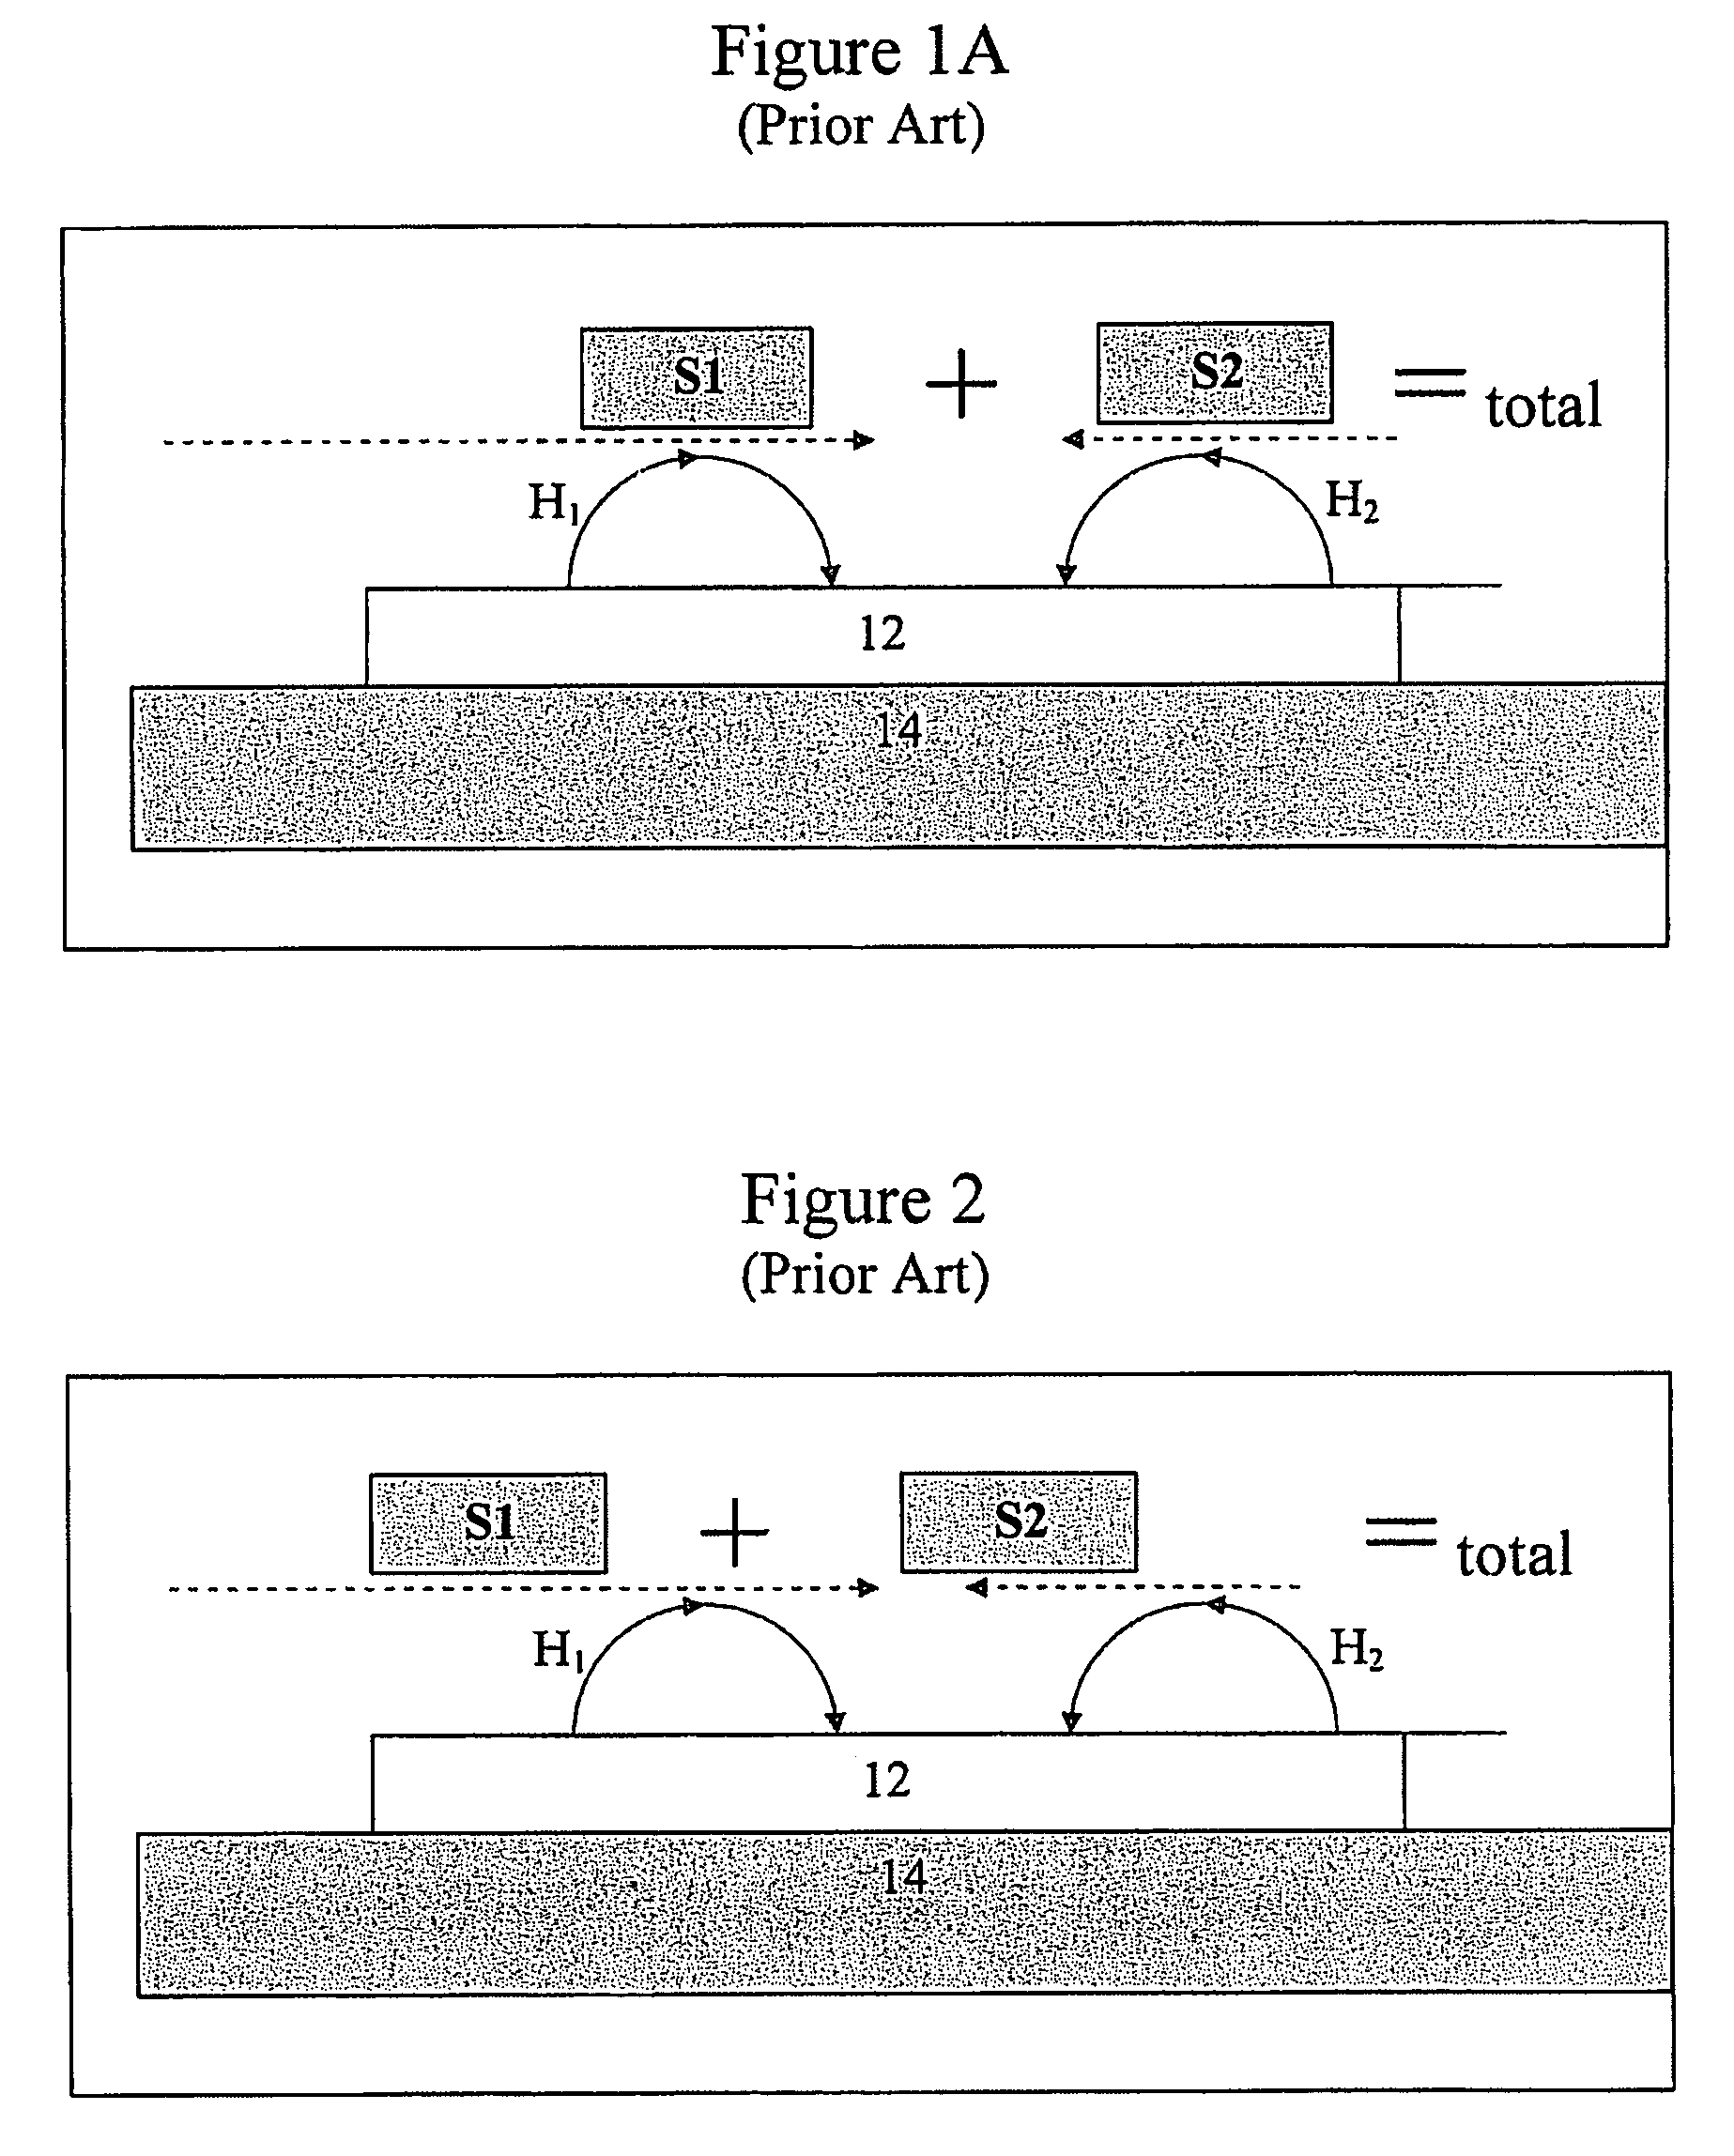 Reduced axial movement error in a torque-sensing system